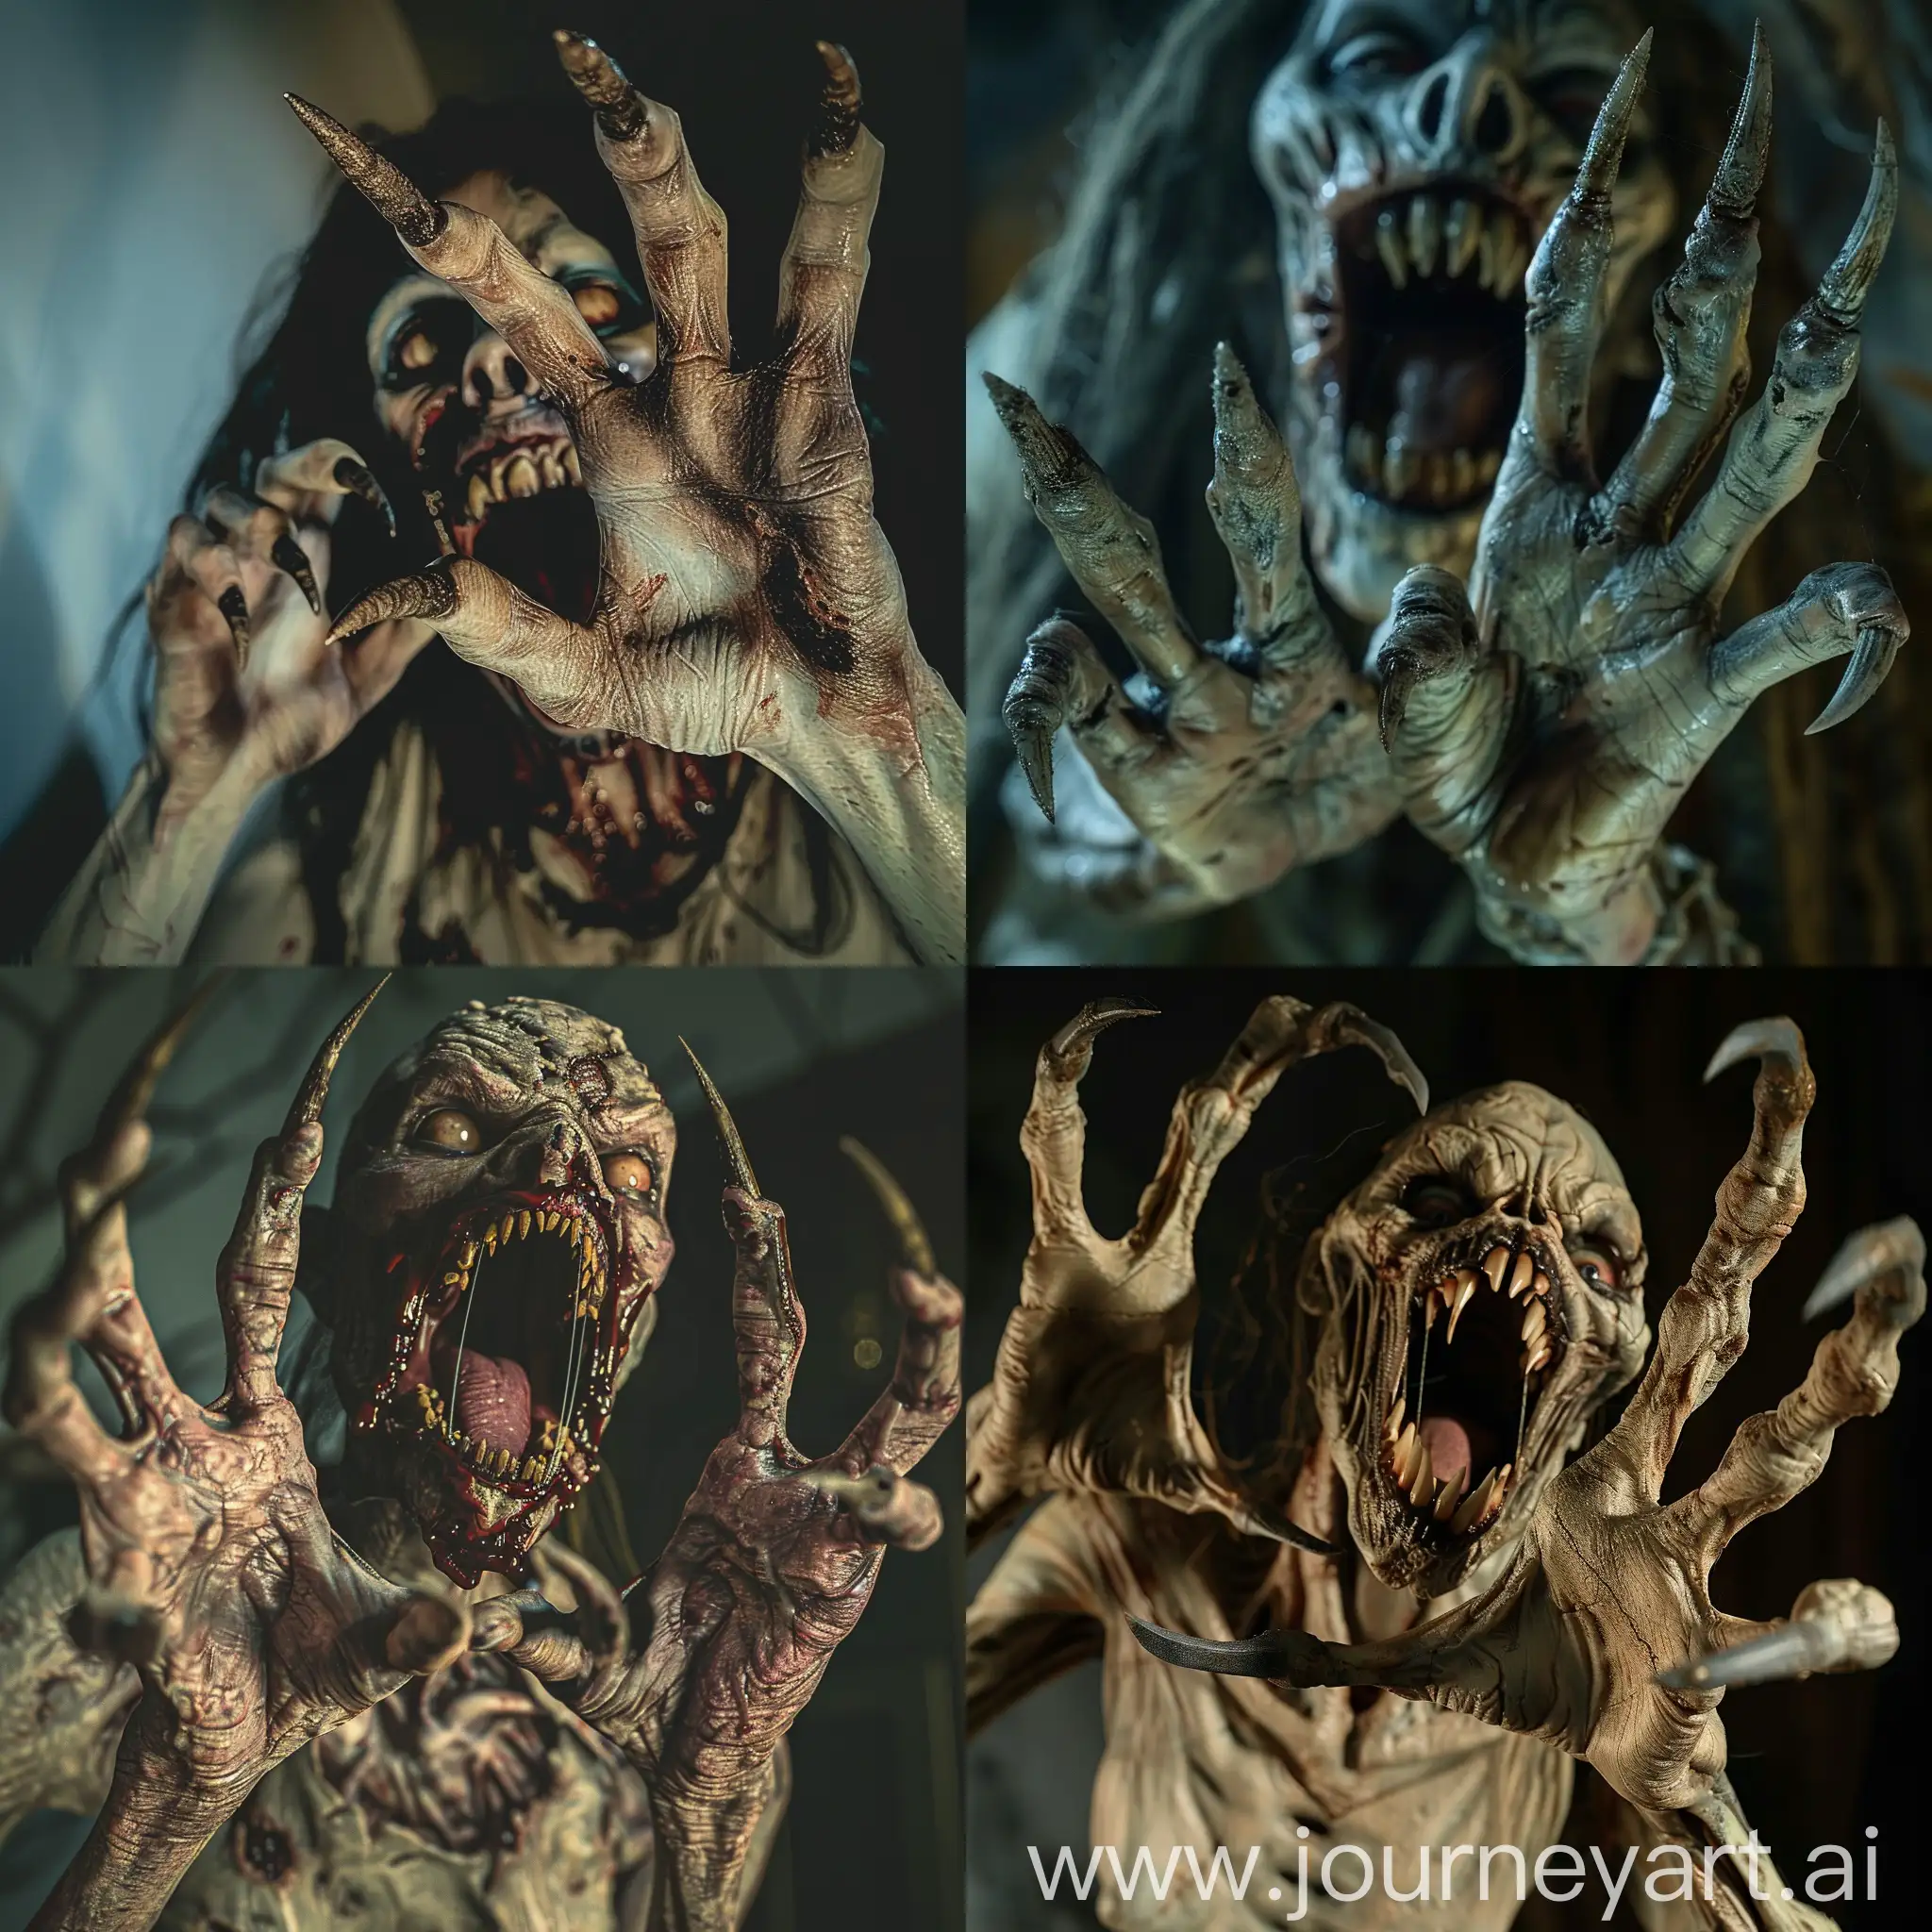 a photorealistic and horrifying nightmare scene of a dead zombie female with long curved pointed dirty nails like sharp claws protruding from each of the five detailed and realistic human fingers The zombie's menacingly open mouth reveals pointed teeth resembling fangs under atmospheric lighting in a full anatomical depiction, set in a night-time setting that is very clear without flaws.